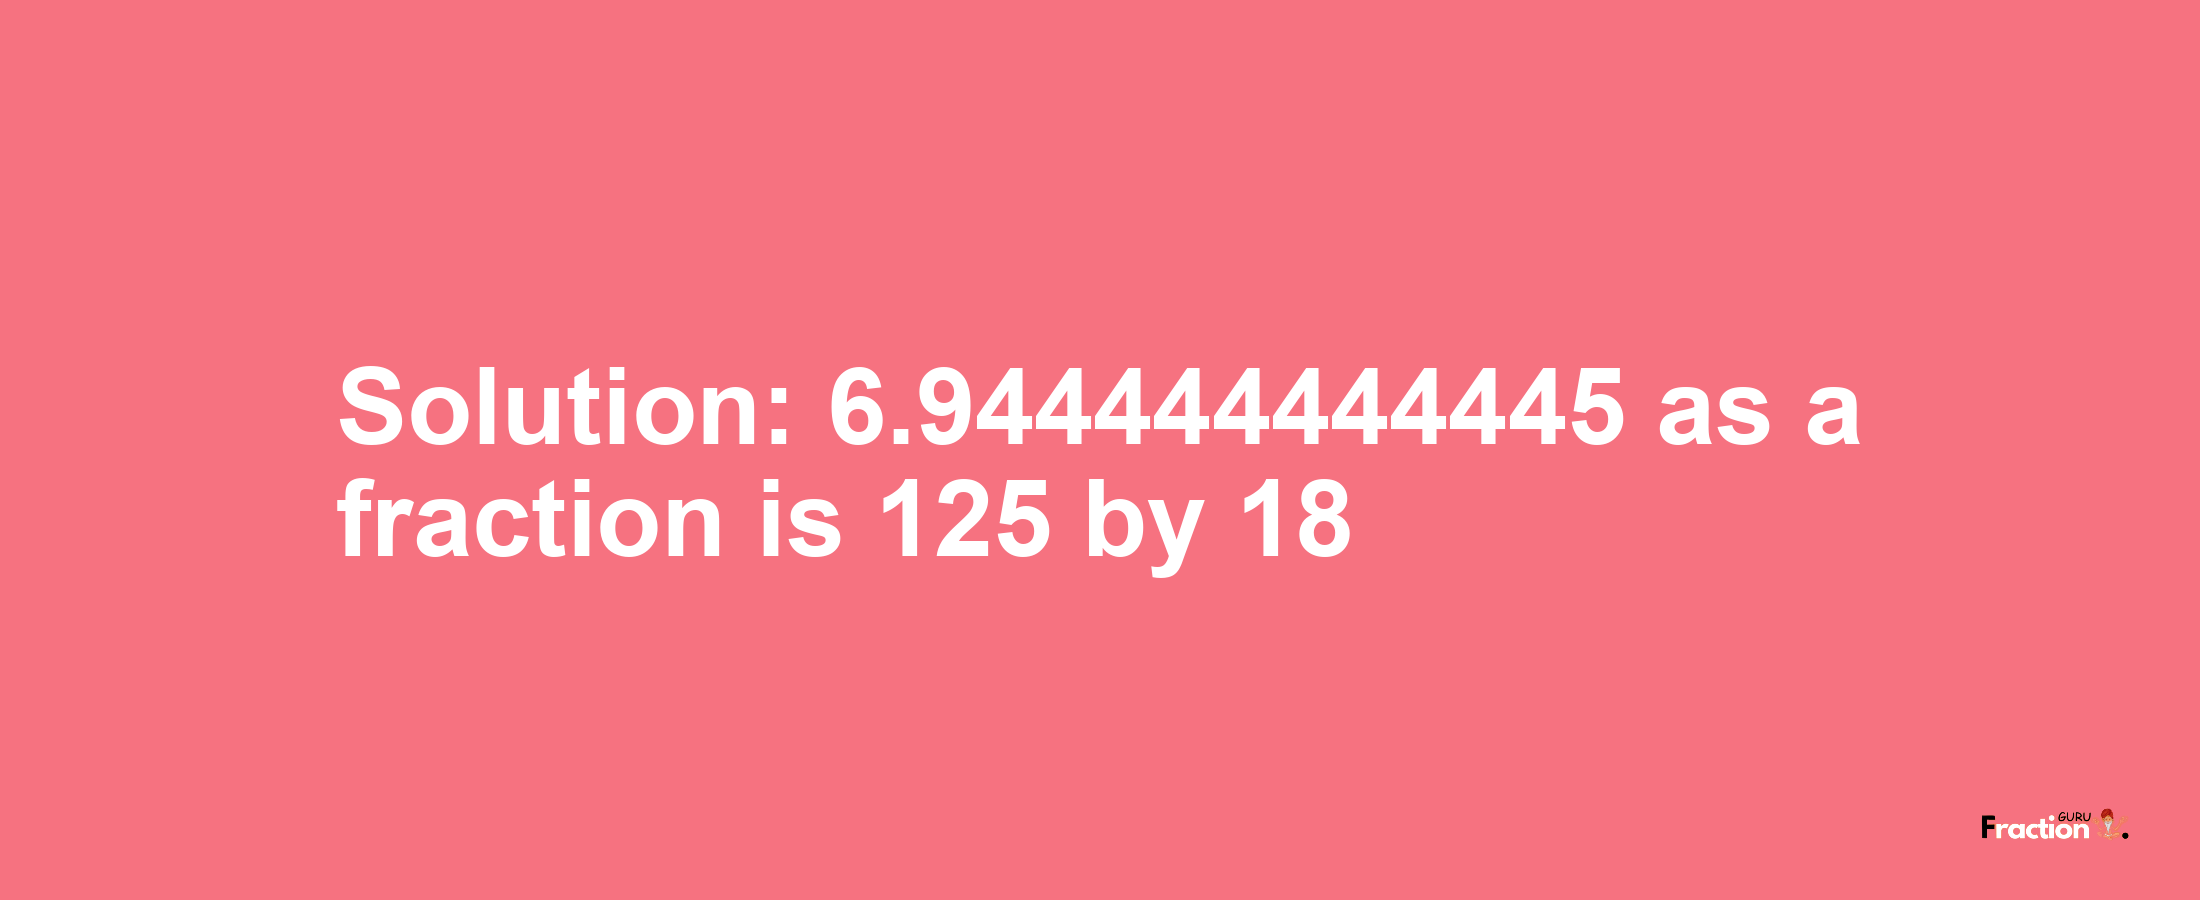 Solution:6.944444444445 as a fraction is 125/18